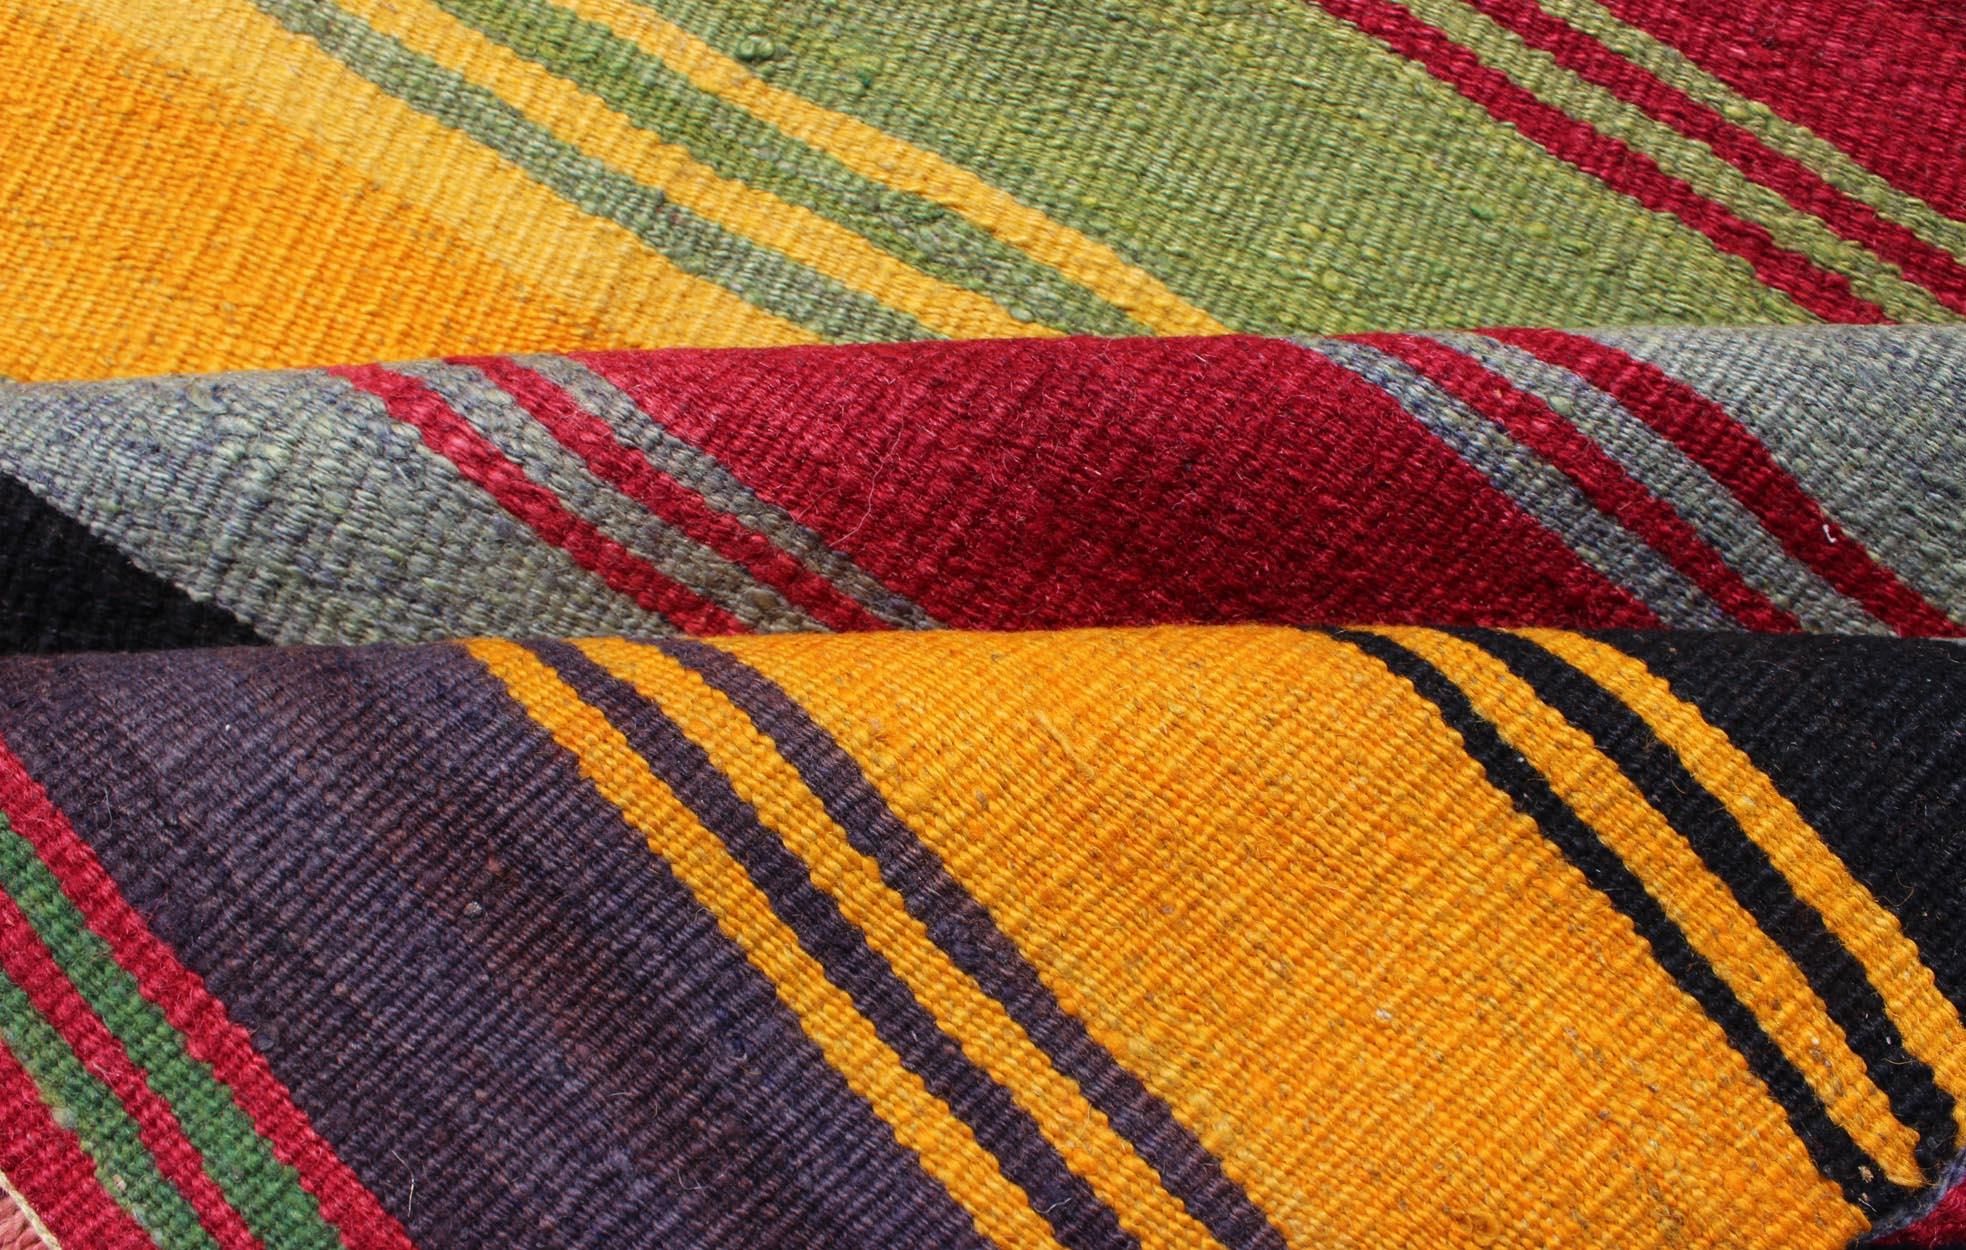 20th Century Bright & Colorful Vintage Turkish Kilim Rug in Stripes Design with Vivid Colors For Sale